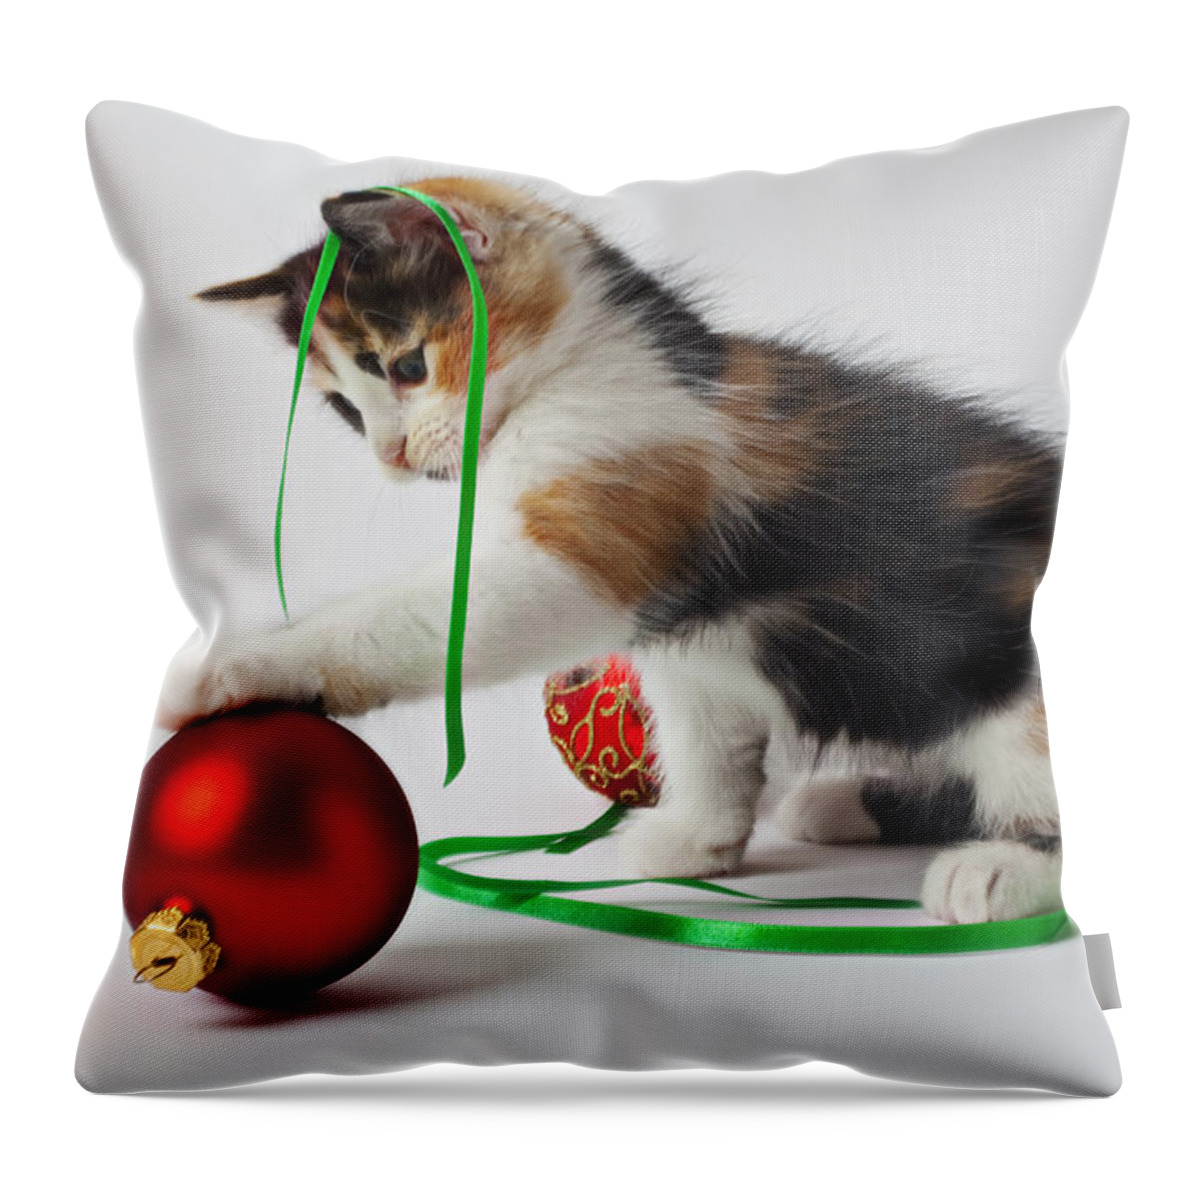 Calico Kitten Christmas Ornaments Throw Pillow featuring the photograph Calico kitten and Christmas ornaments by Garry Gay